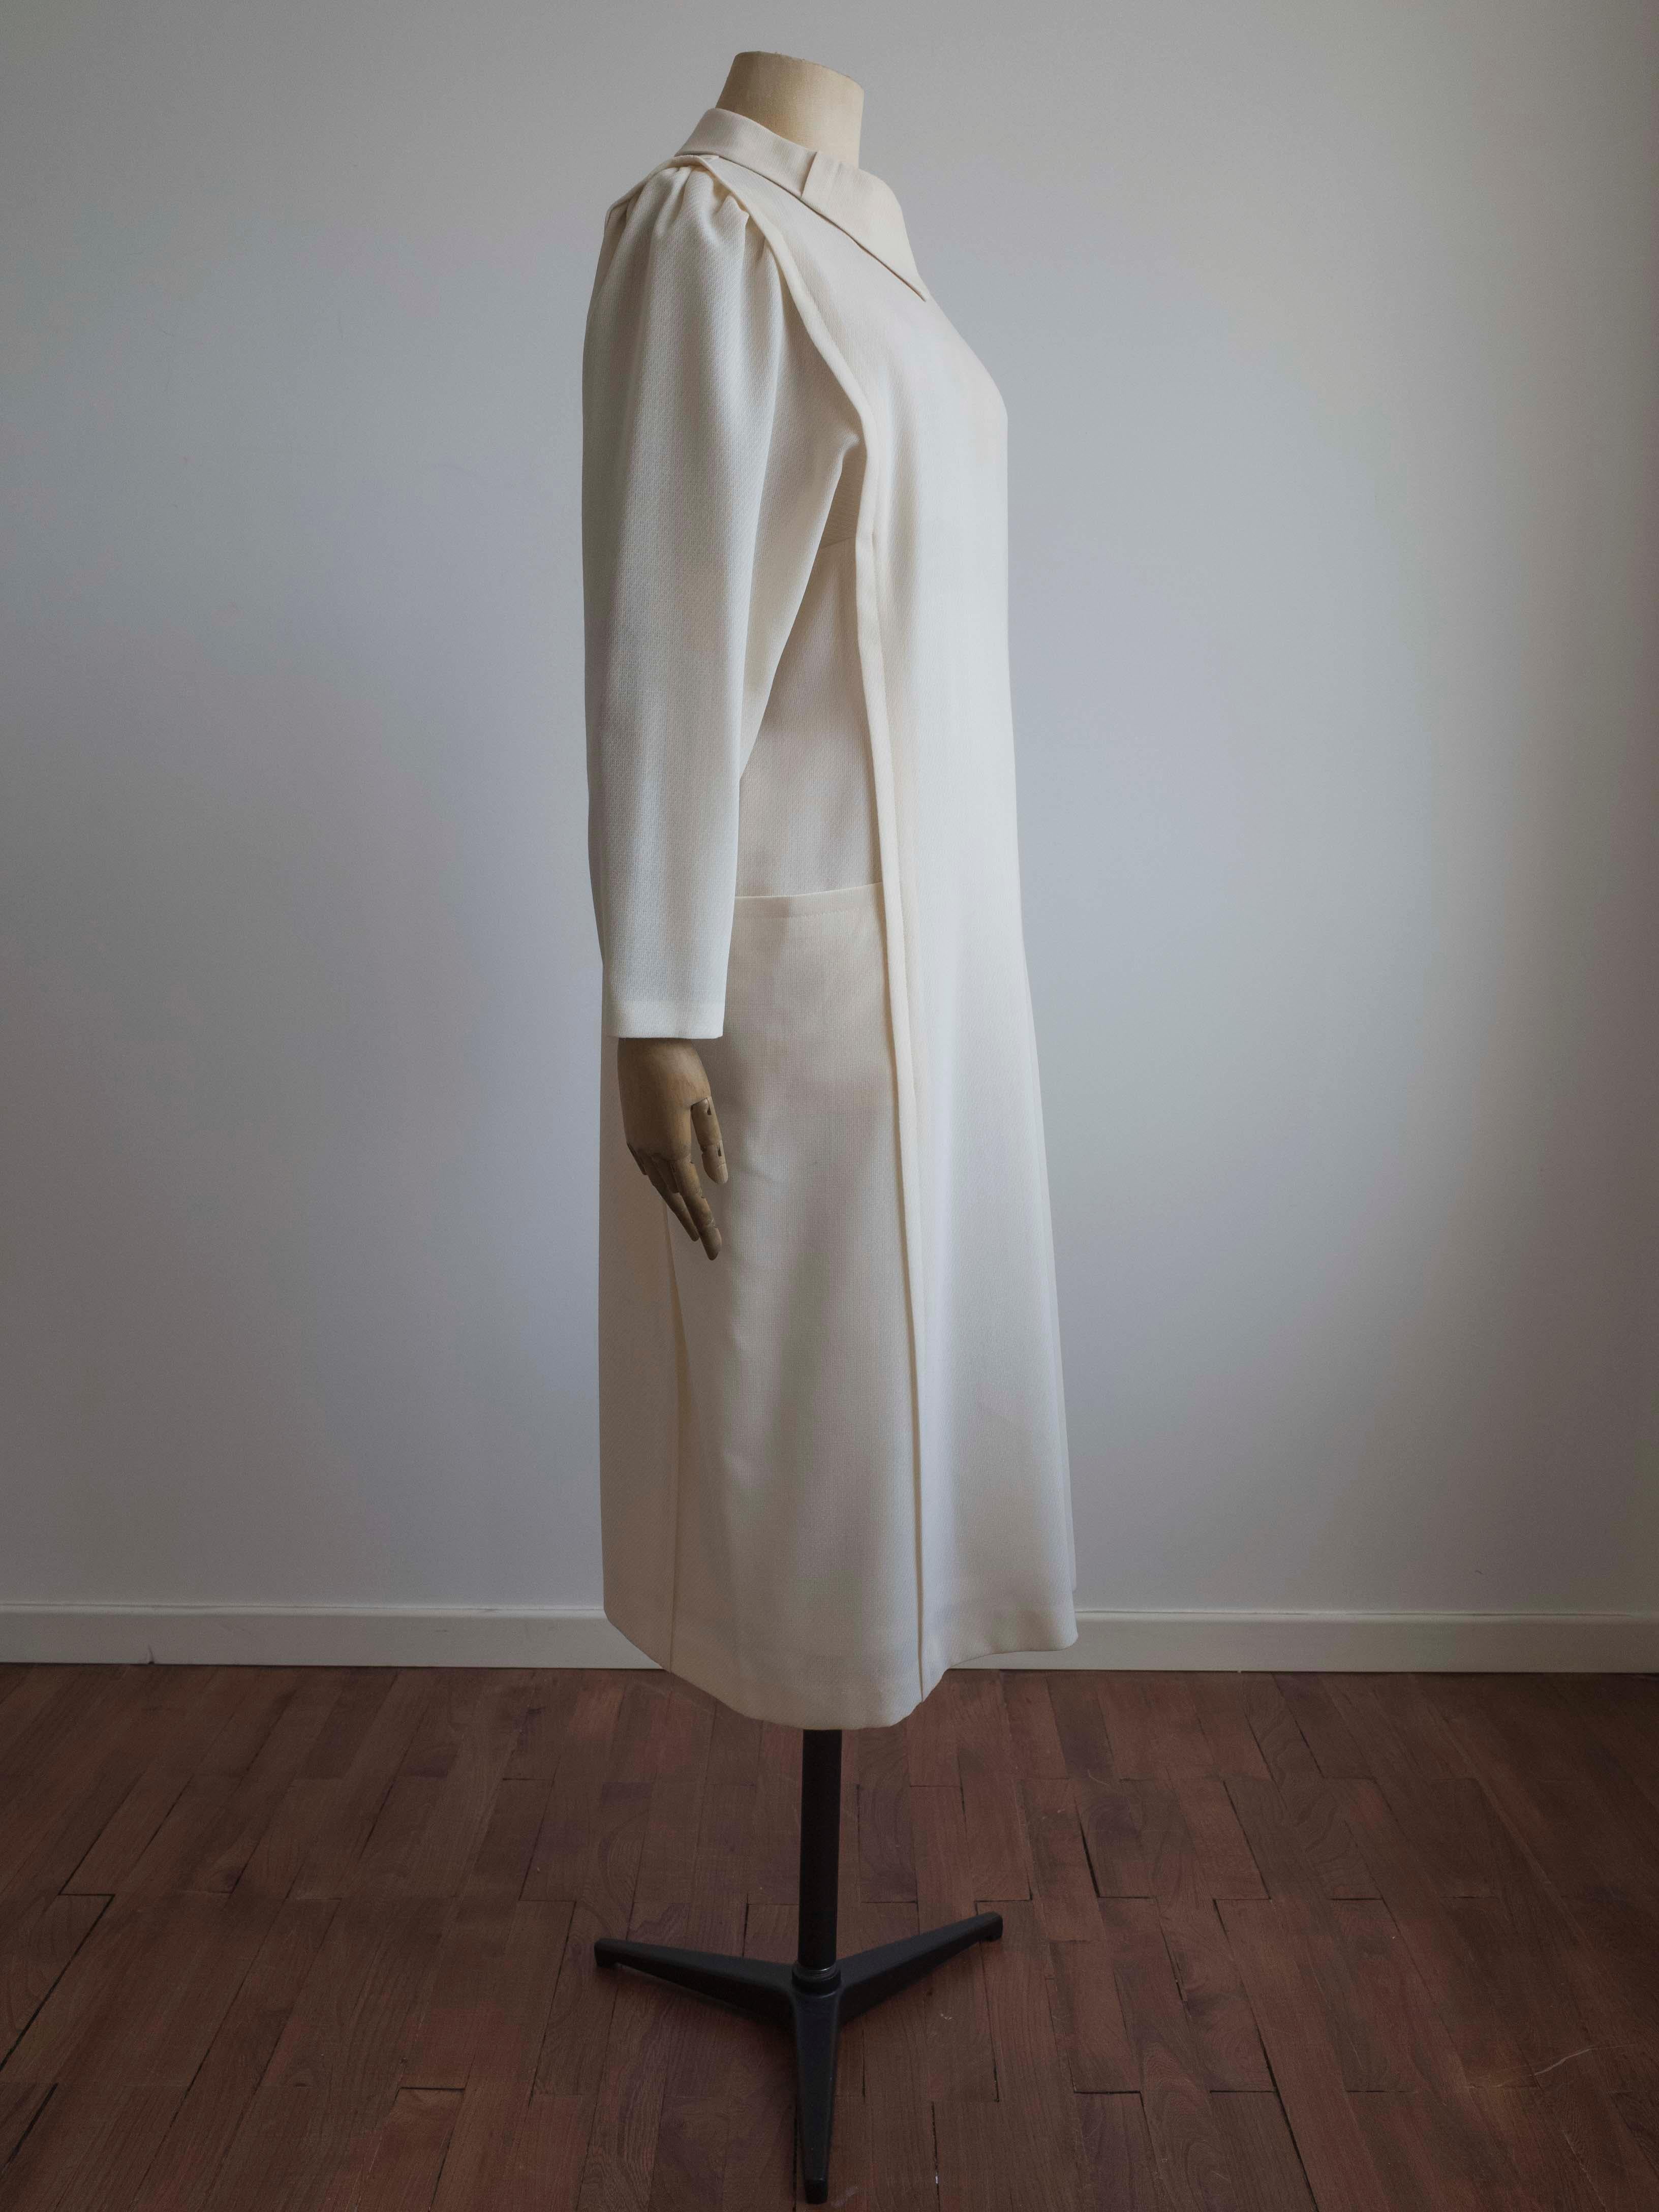 Vintage 1960s dress in a soft cream wool blend by Schworm Modell.

Features pleated dolman sleeves and side pockets. Fully lined with zipper at centre back.
This dress has been professional cleaned.

Outer: 45% Wool, 55% Polyester
Lining: 100%